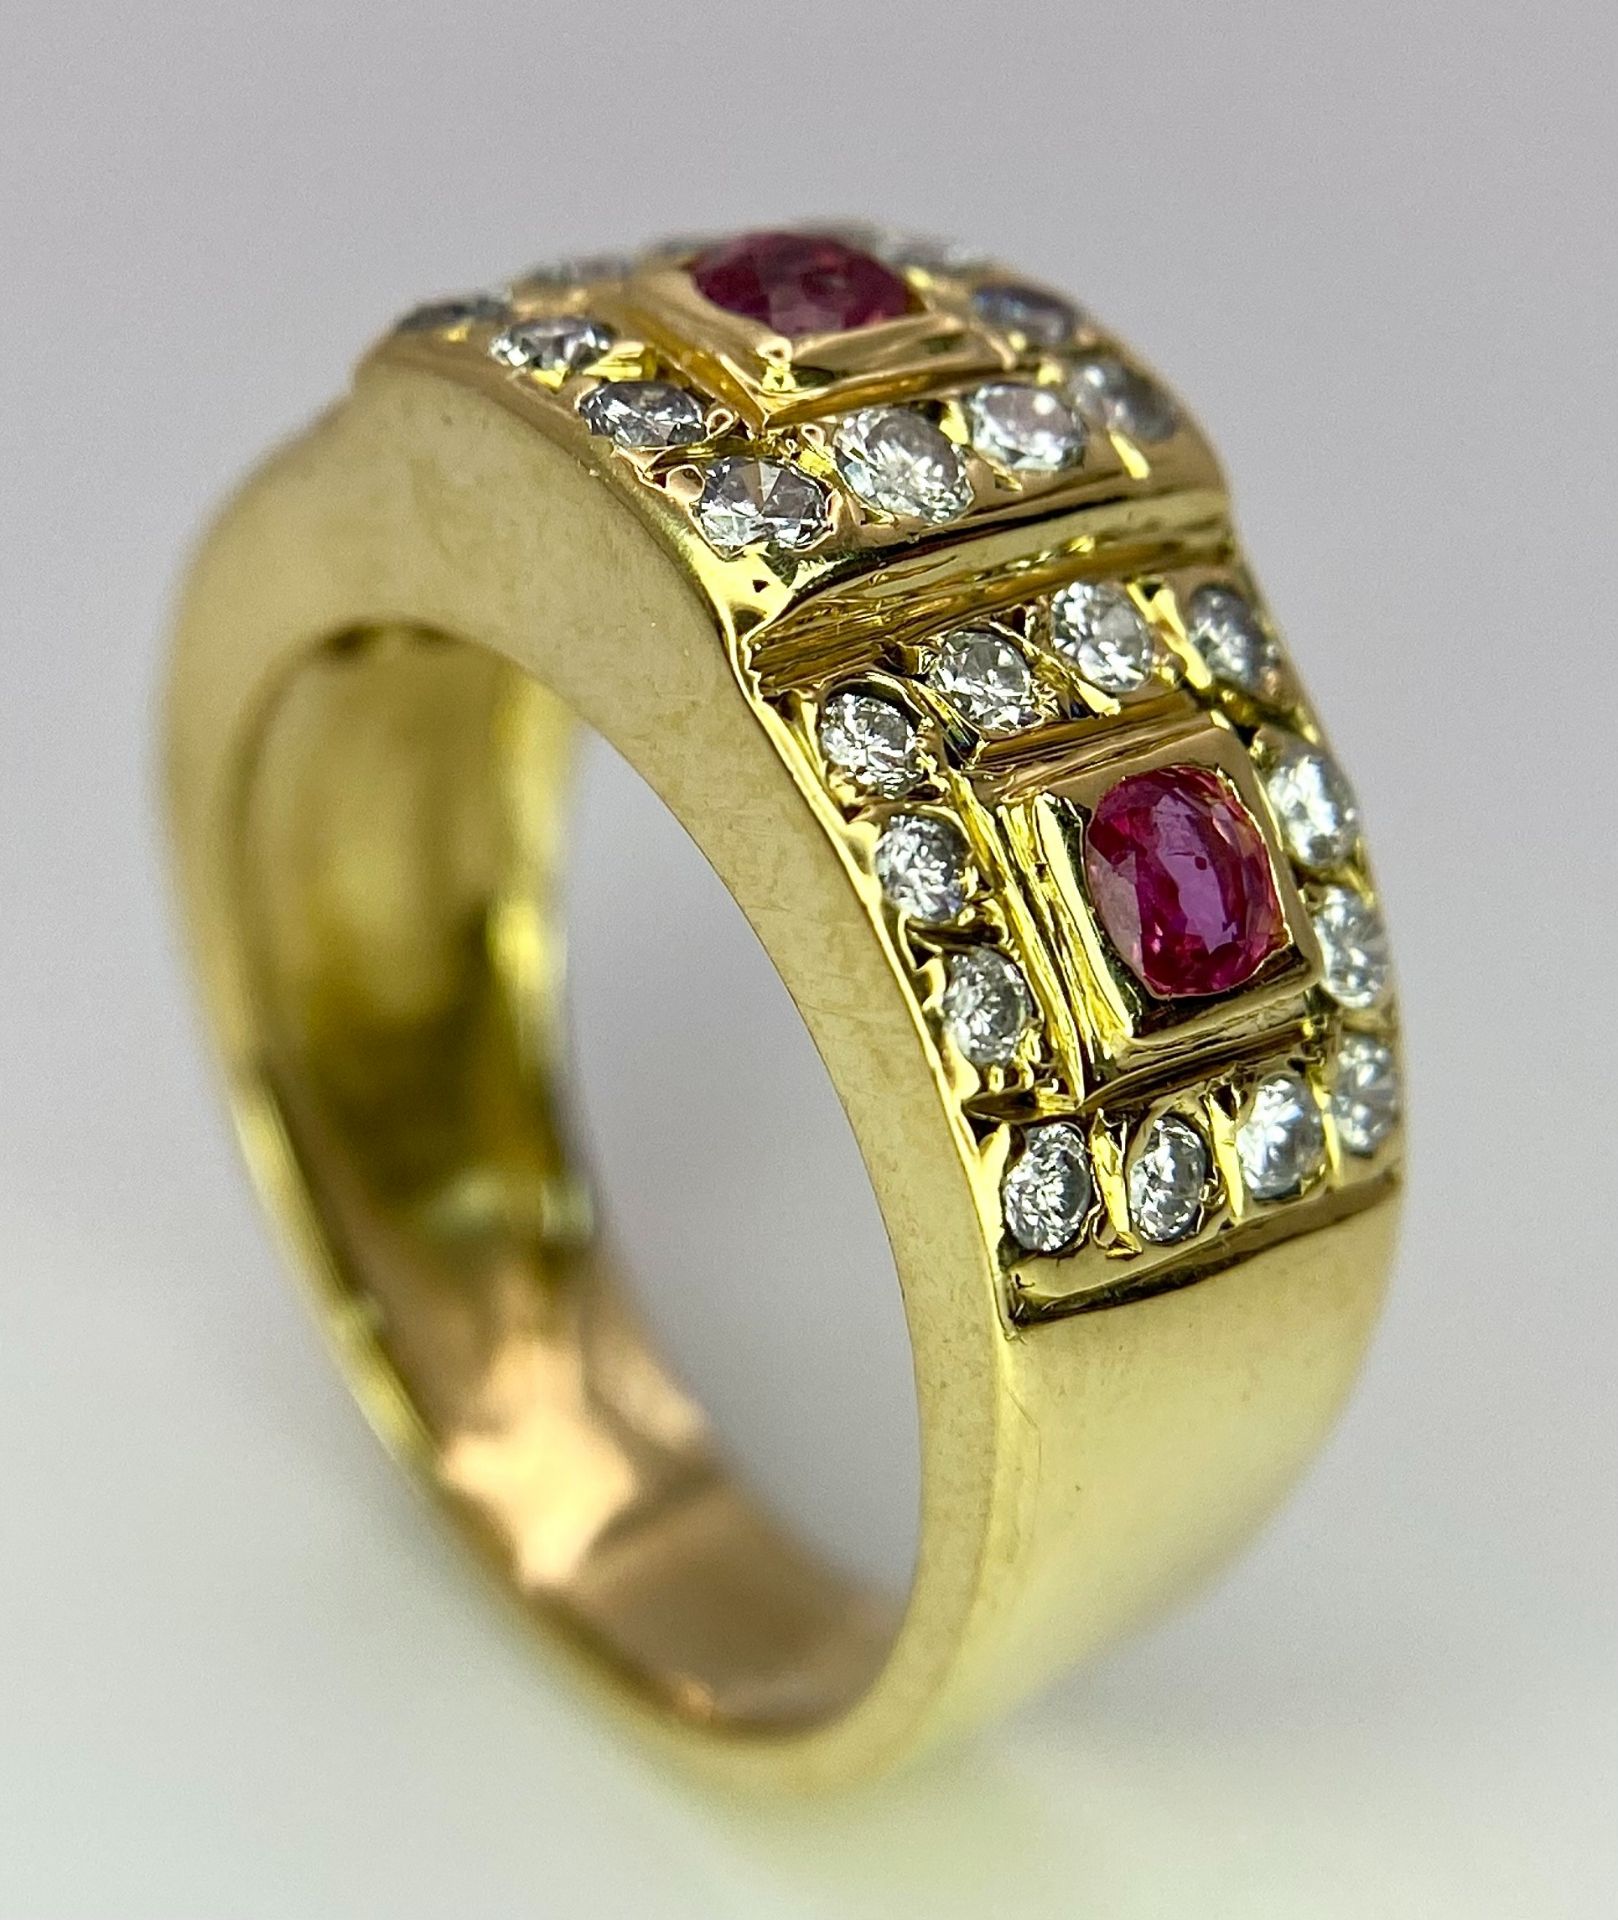 AN 18K YELLOW GOLD DIAMOND & RUBY RING. 0.60ctw, size K, 6.8g total weight. Ref: SC 8072 - Image 5 of 9